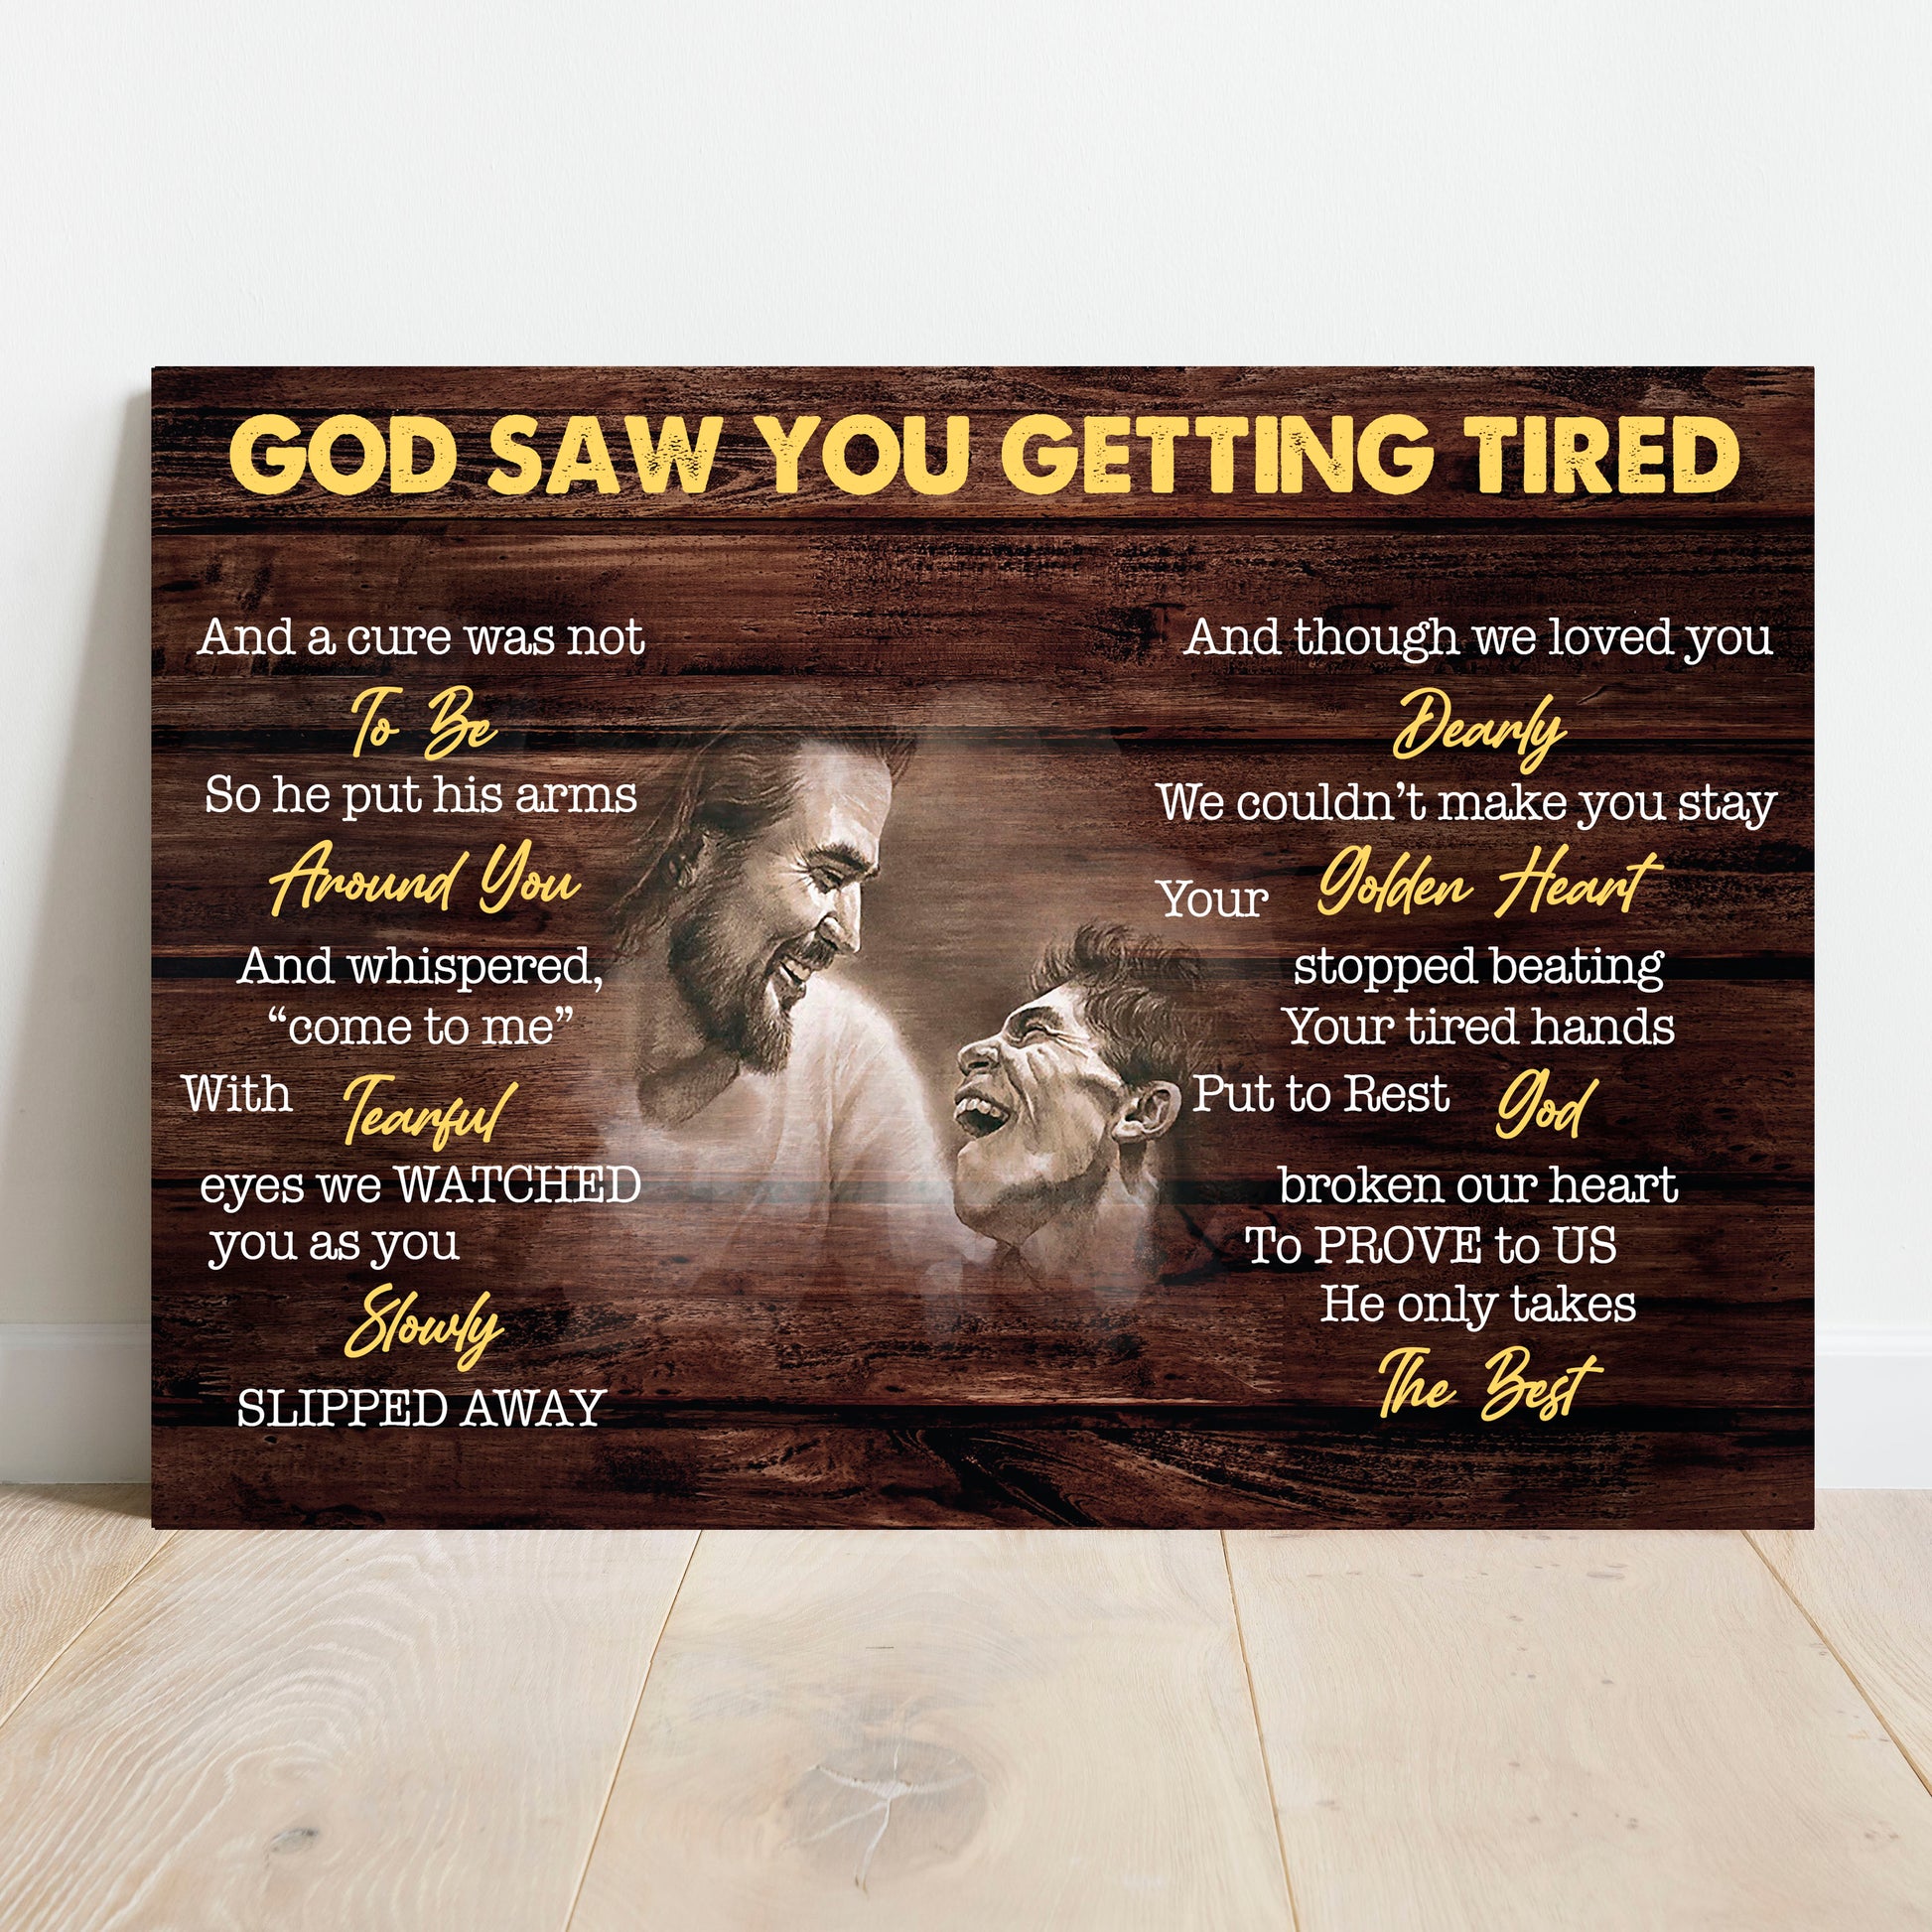 God Saw You Getting Tired Memorial Sign - Image by Tailored Canvases